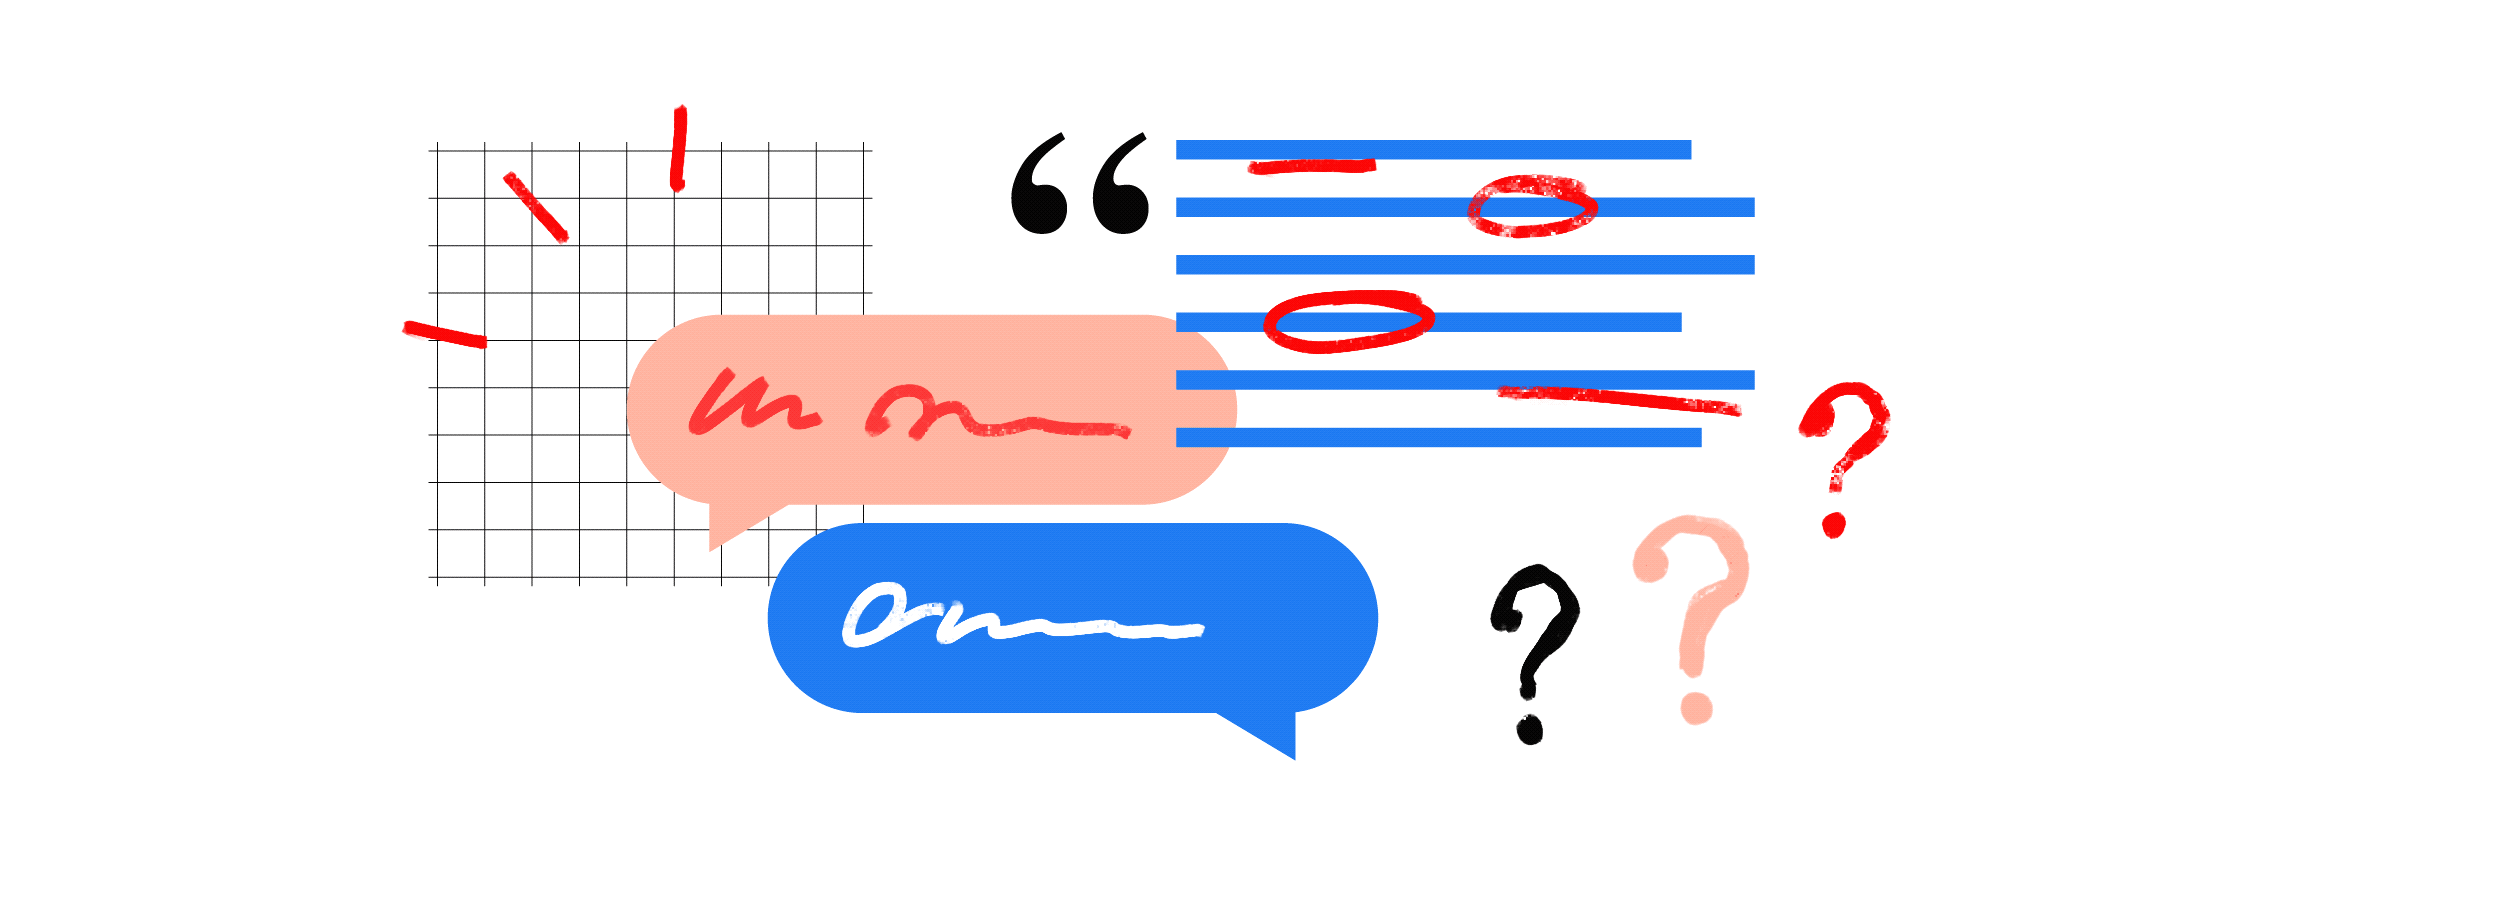 Speech bubbles and question marks indicating a conversation